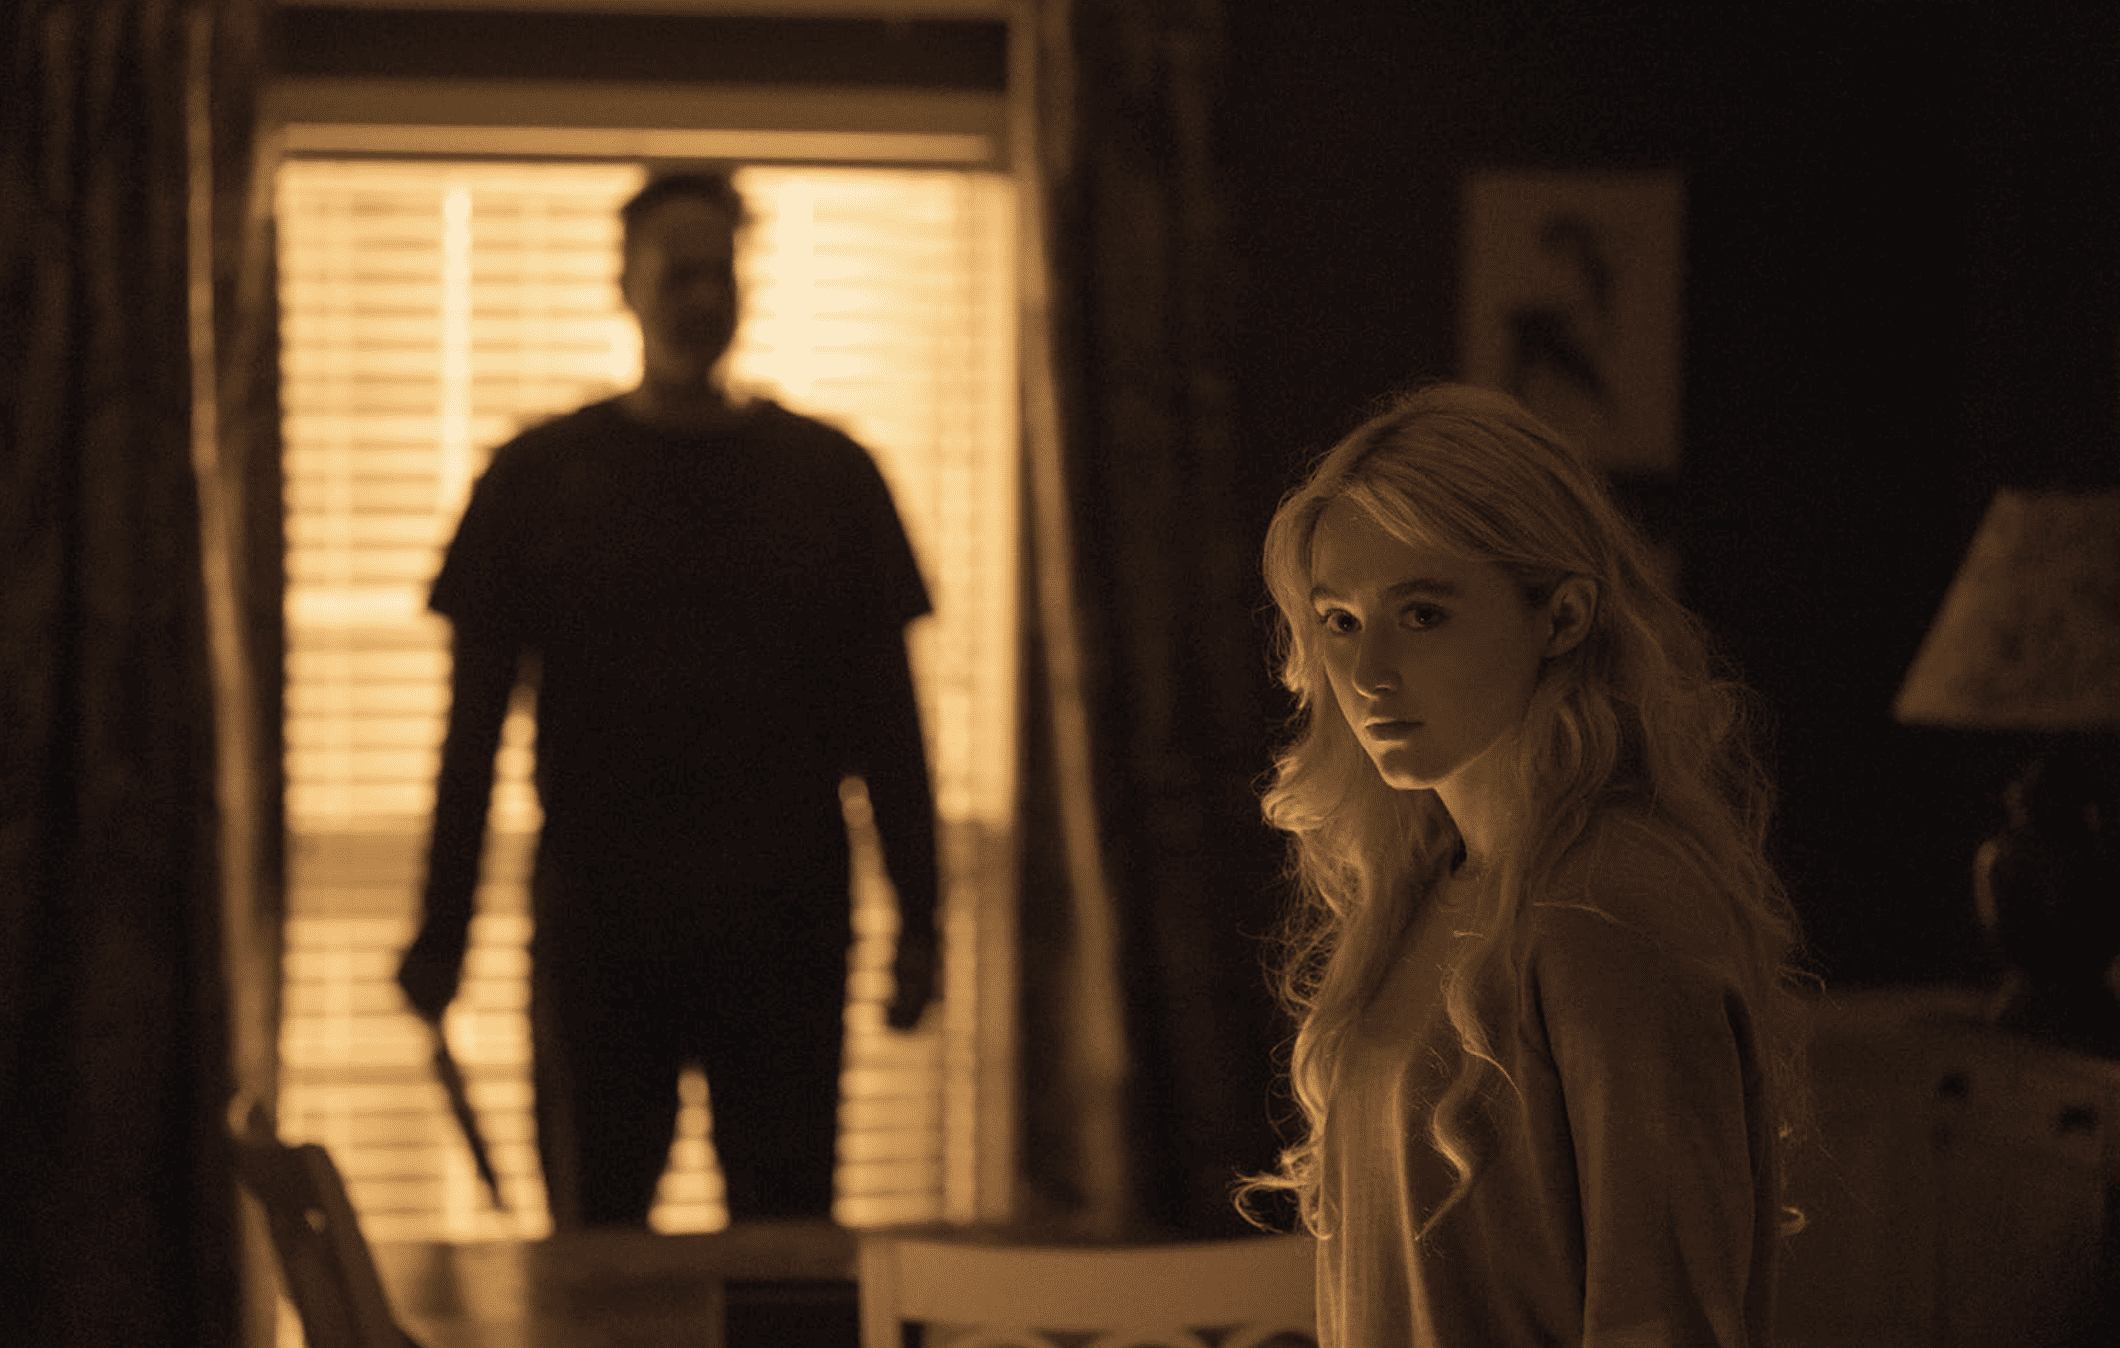 A girl looks into the camera as a silhouetted man with a knife watches her in this image from Blumhouse Productions.